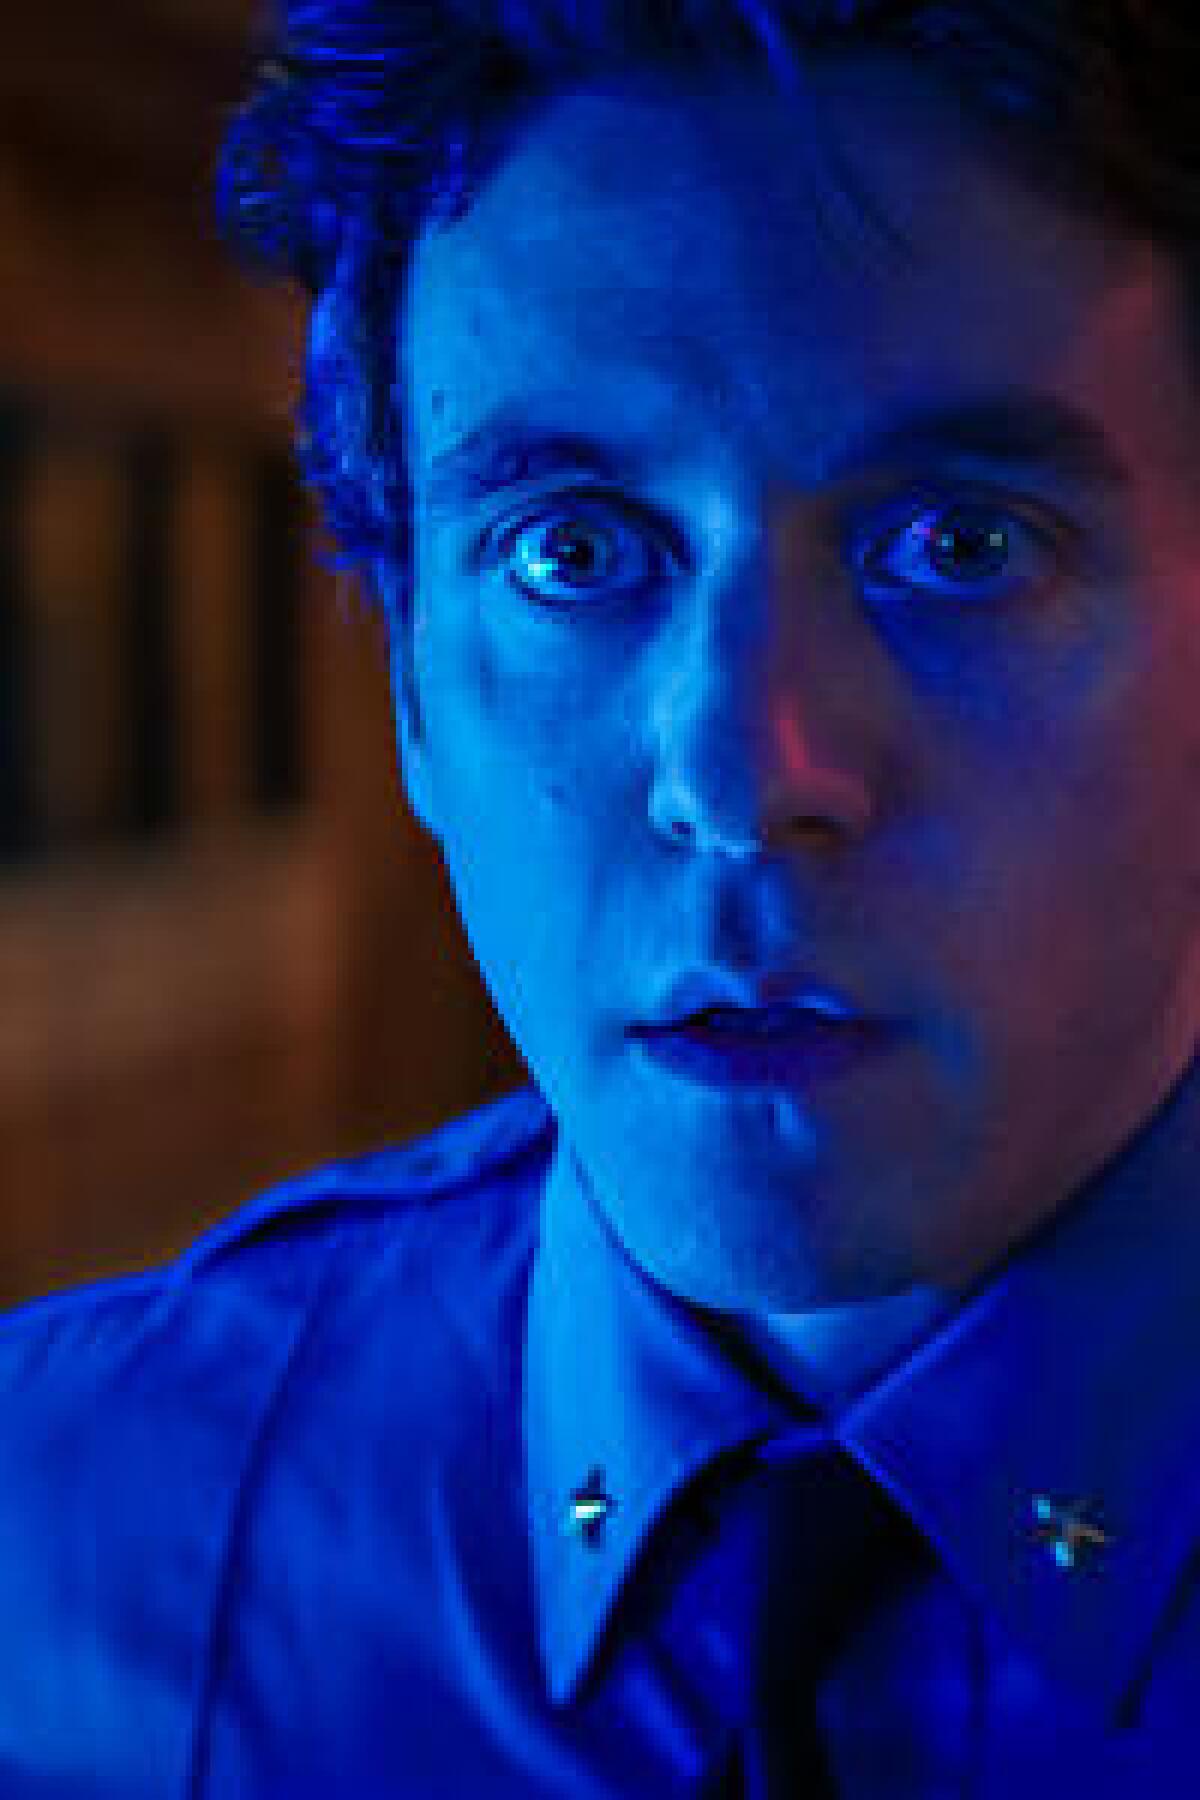 An officer in uniform with wide eyes, bathed in blue light.